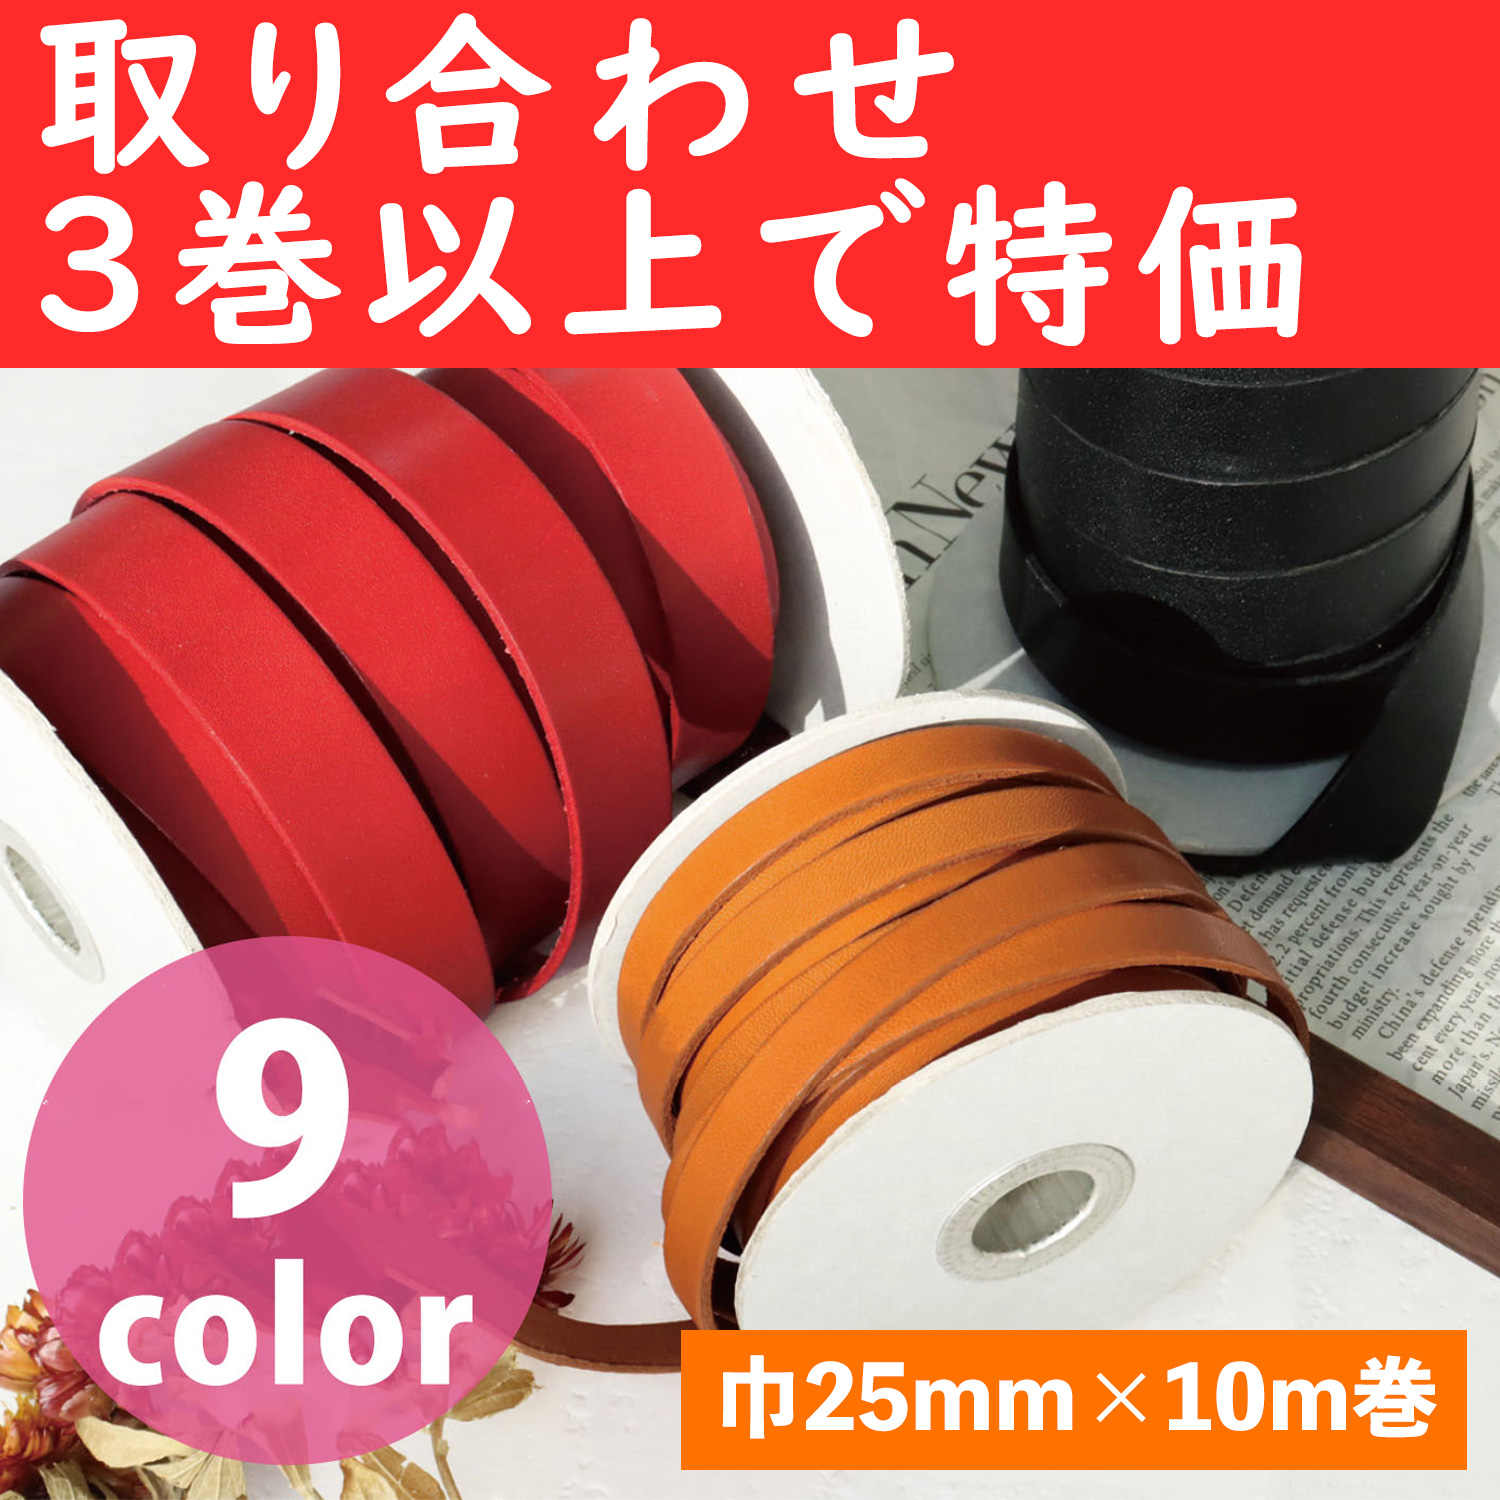 MTLS1025-OVER3 Special) Leather Tape, orders with 3rolls or more (roll)